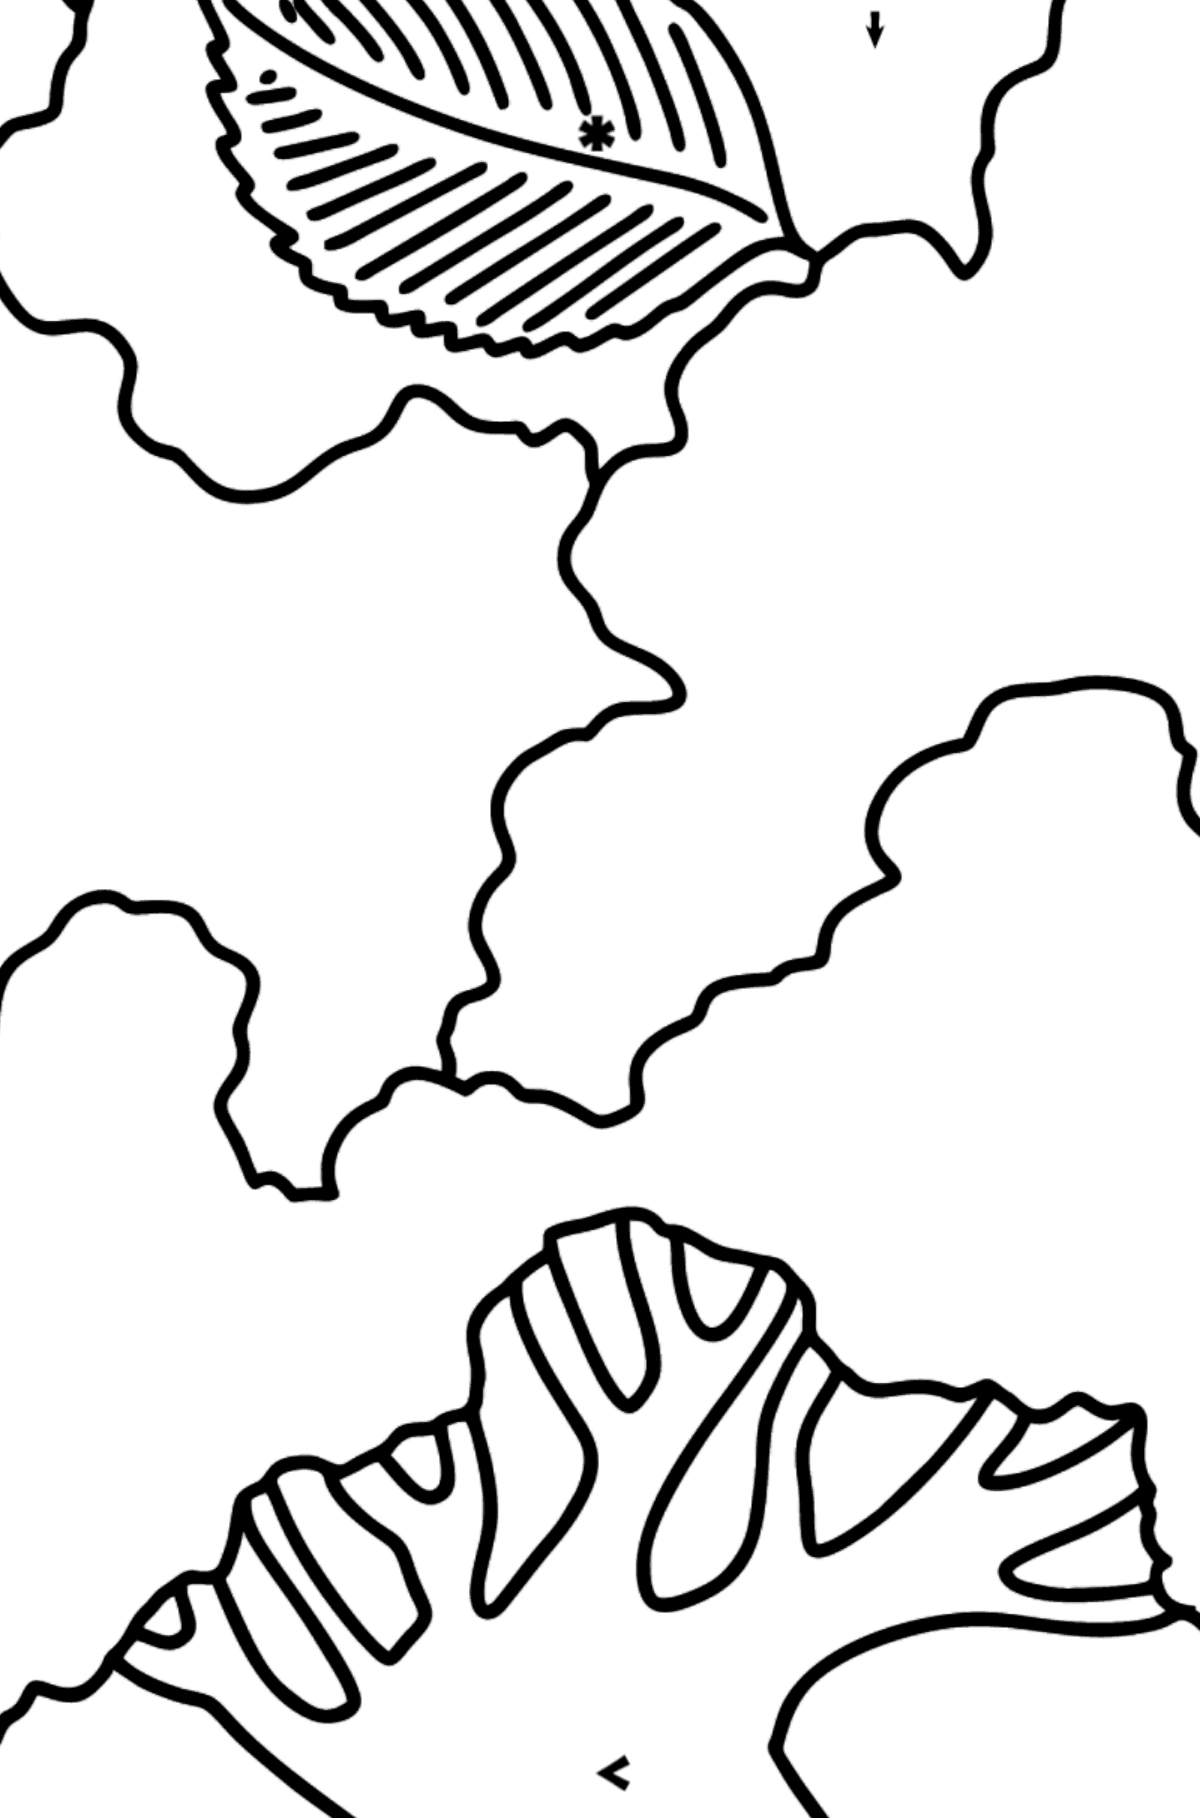 Elm coloring page - Coloring by Symbols for Kids